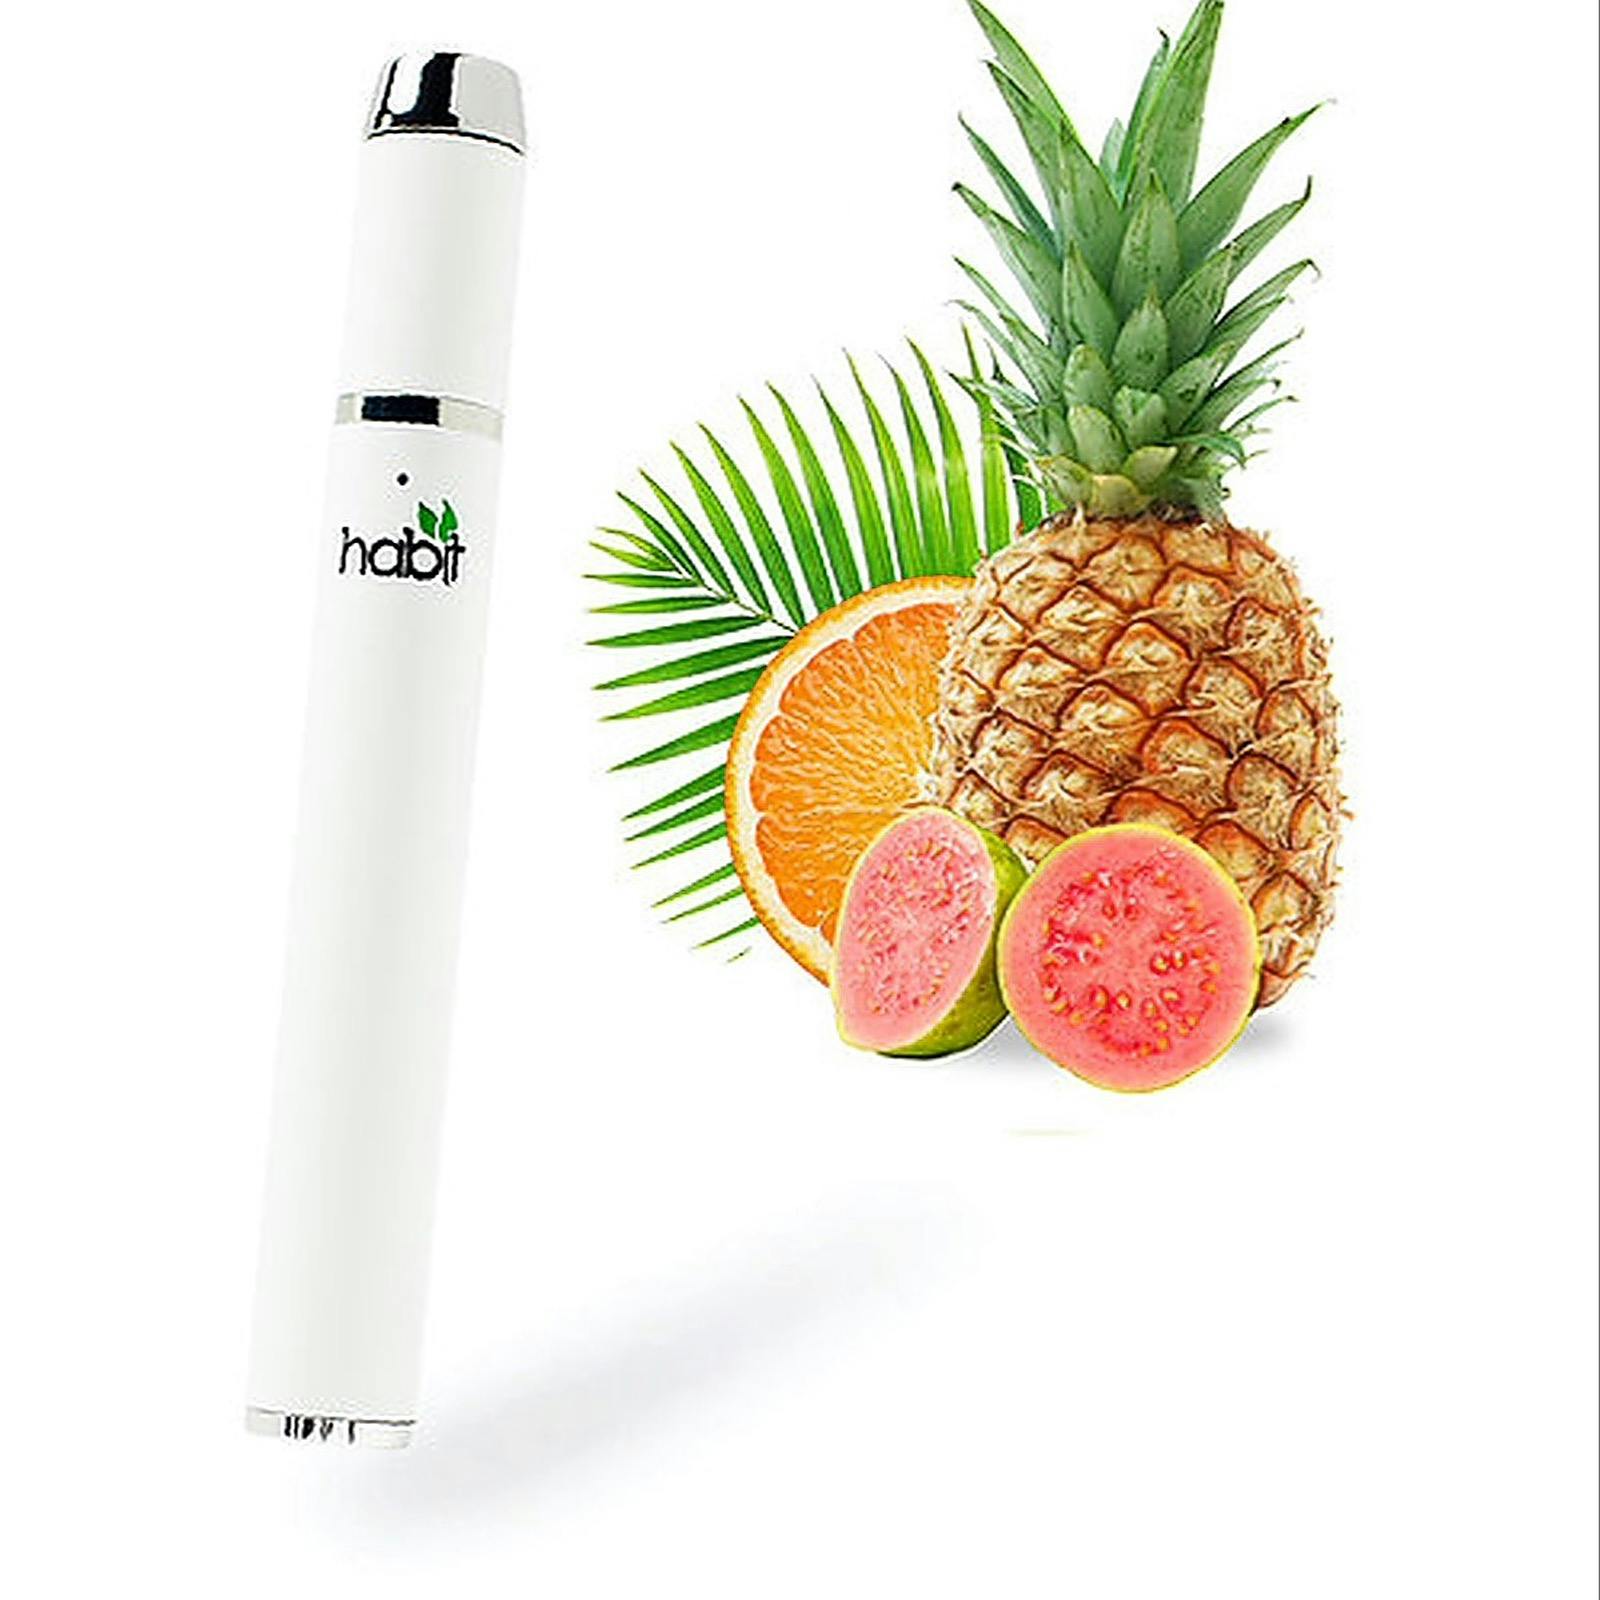 Simply Crafted Free Shipping Save 25 With Code Leafly Tropicanna Cbd Vape Pen 500mg Cbd 1278